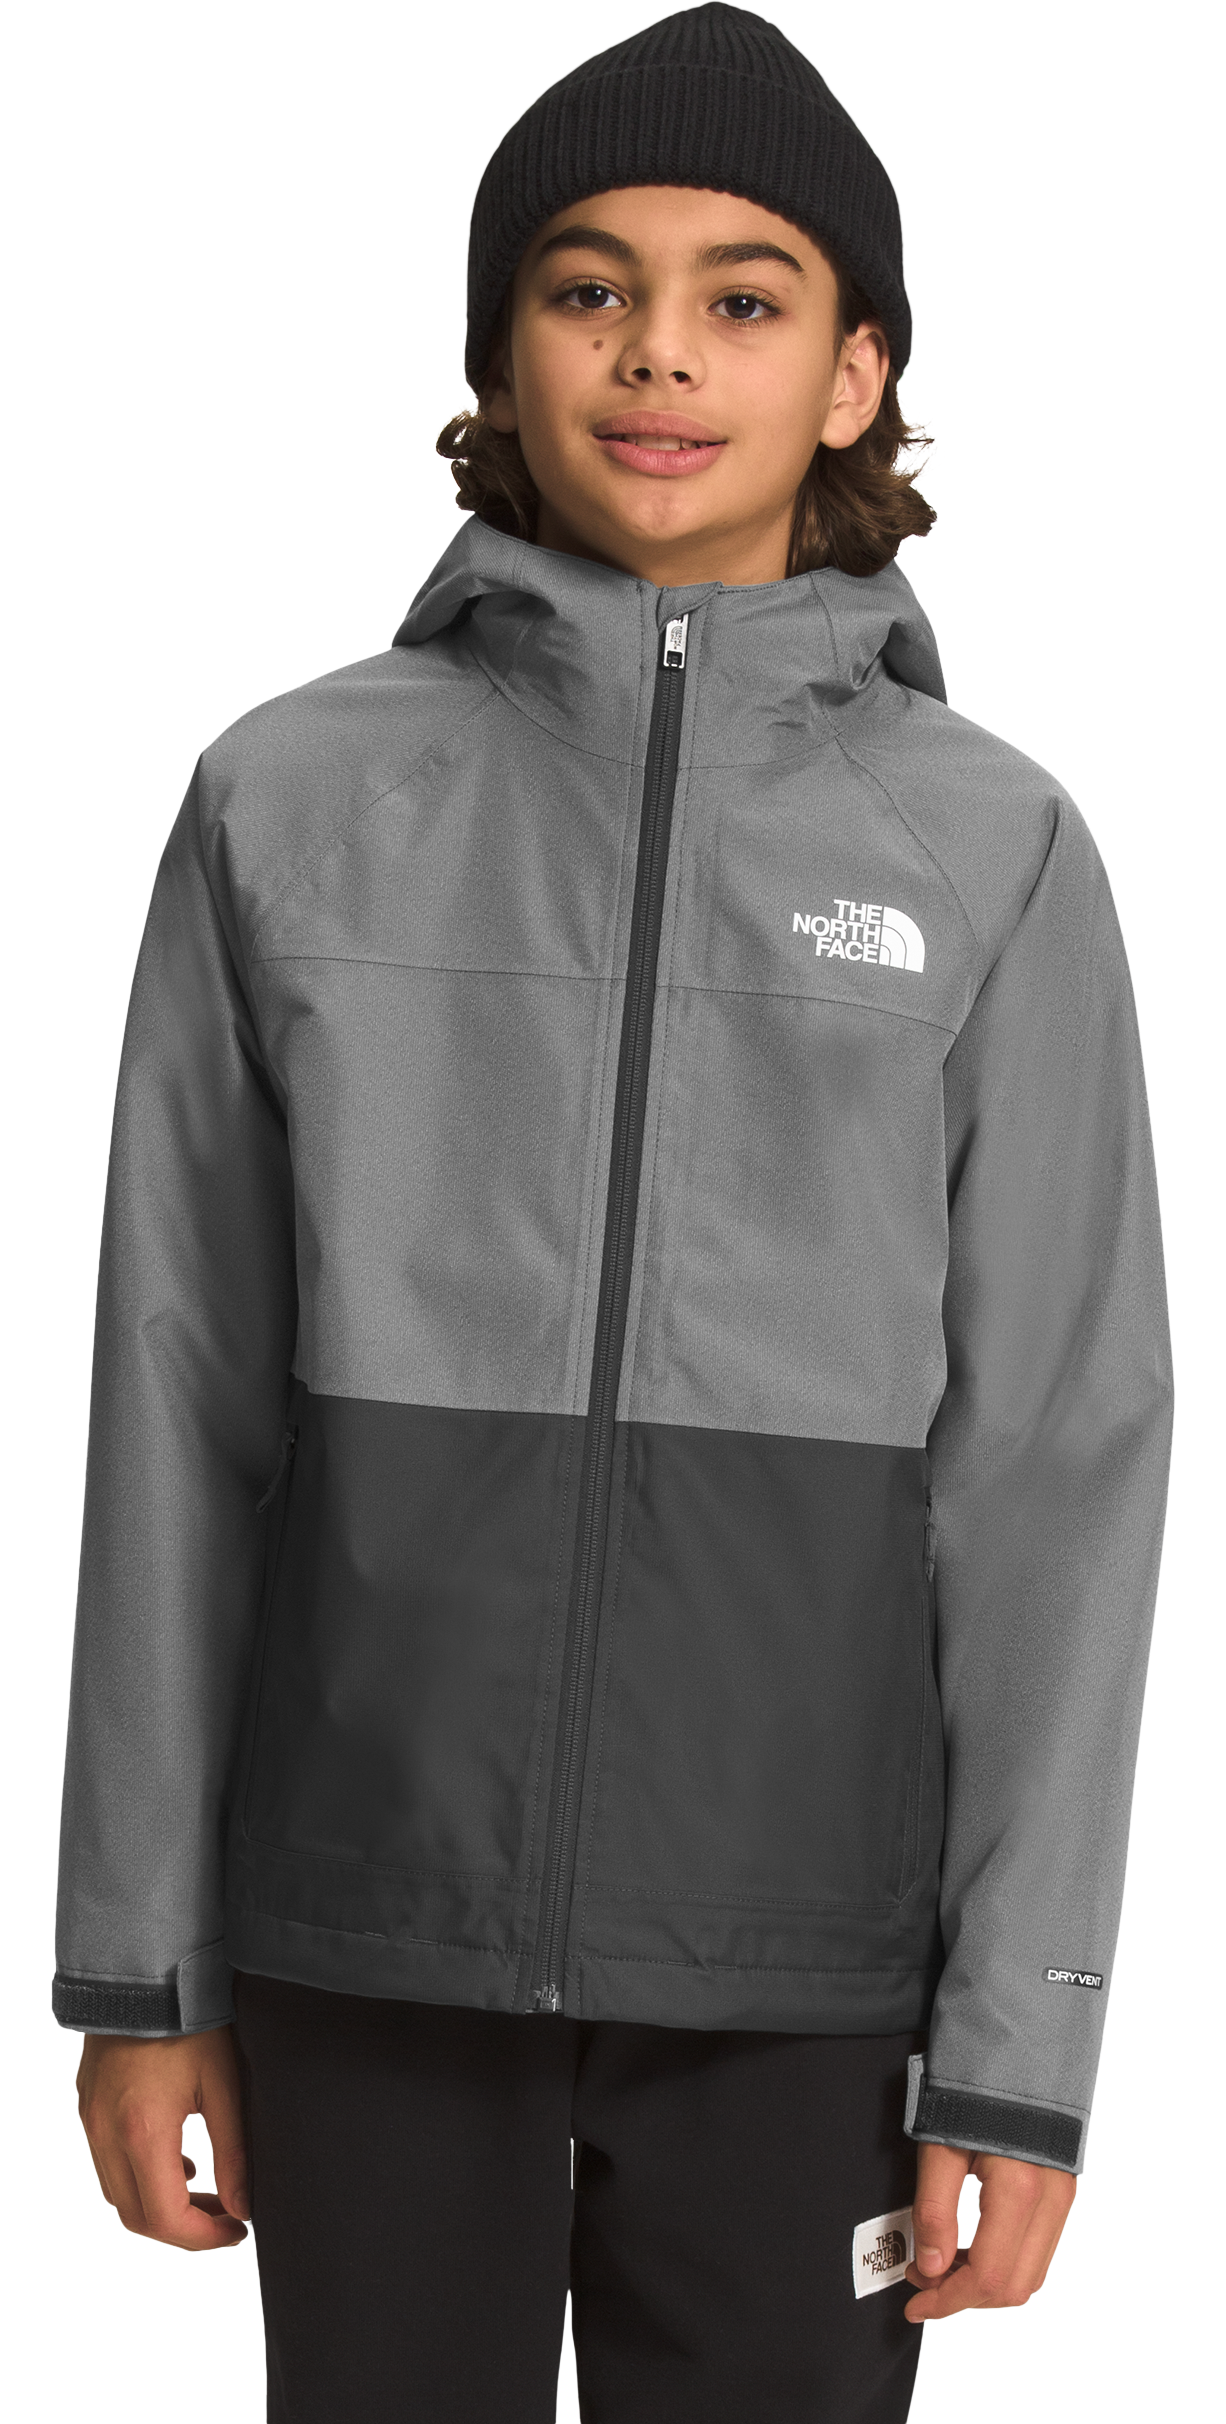 The North Face Vortex Water-Repellent Hooded Jacket for Boys - TNF Medium Grey Heather - S